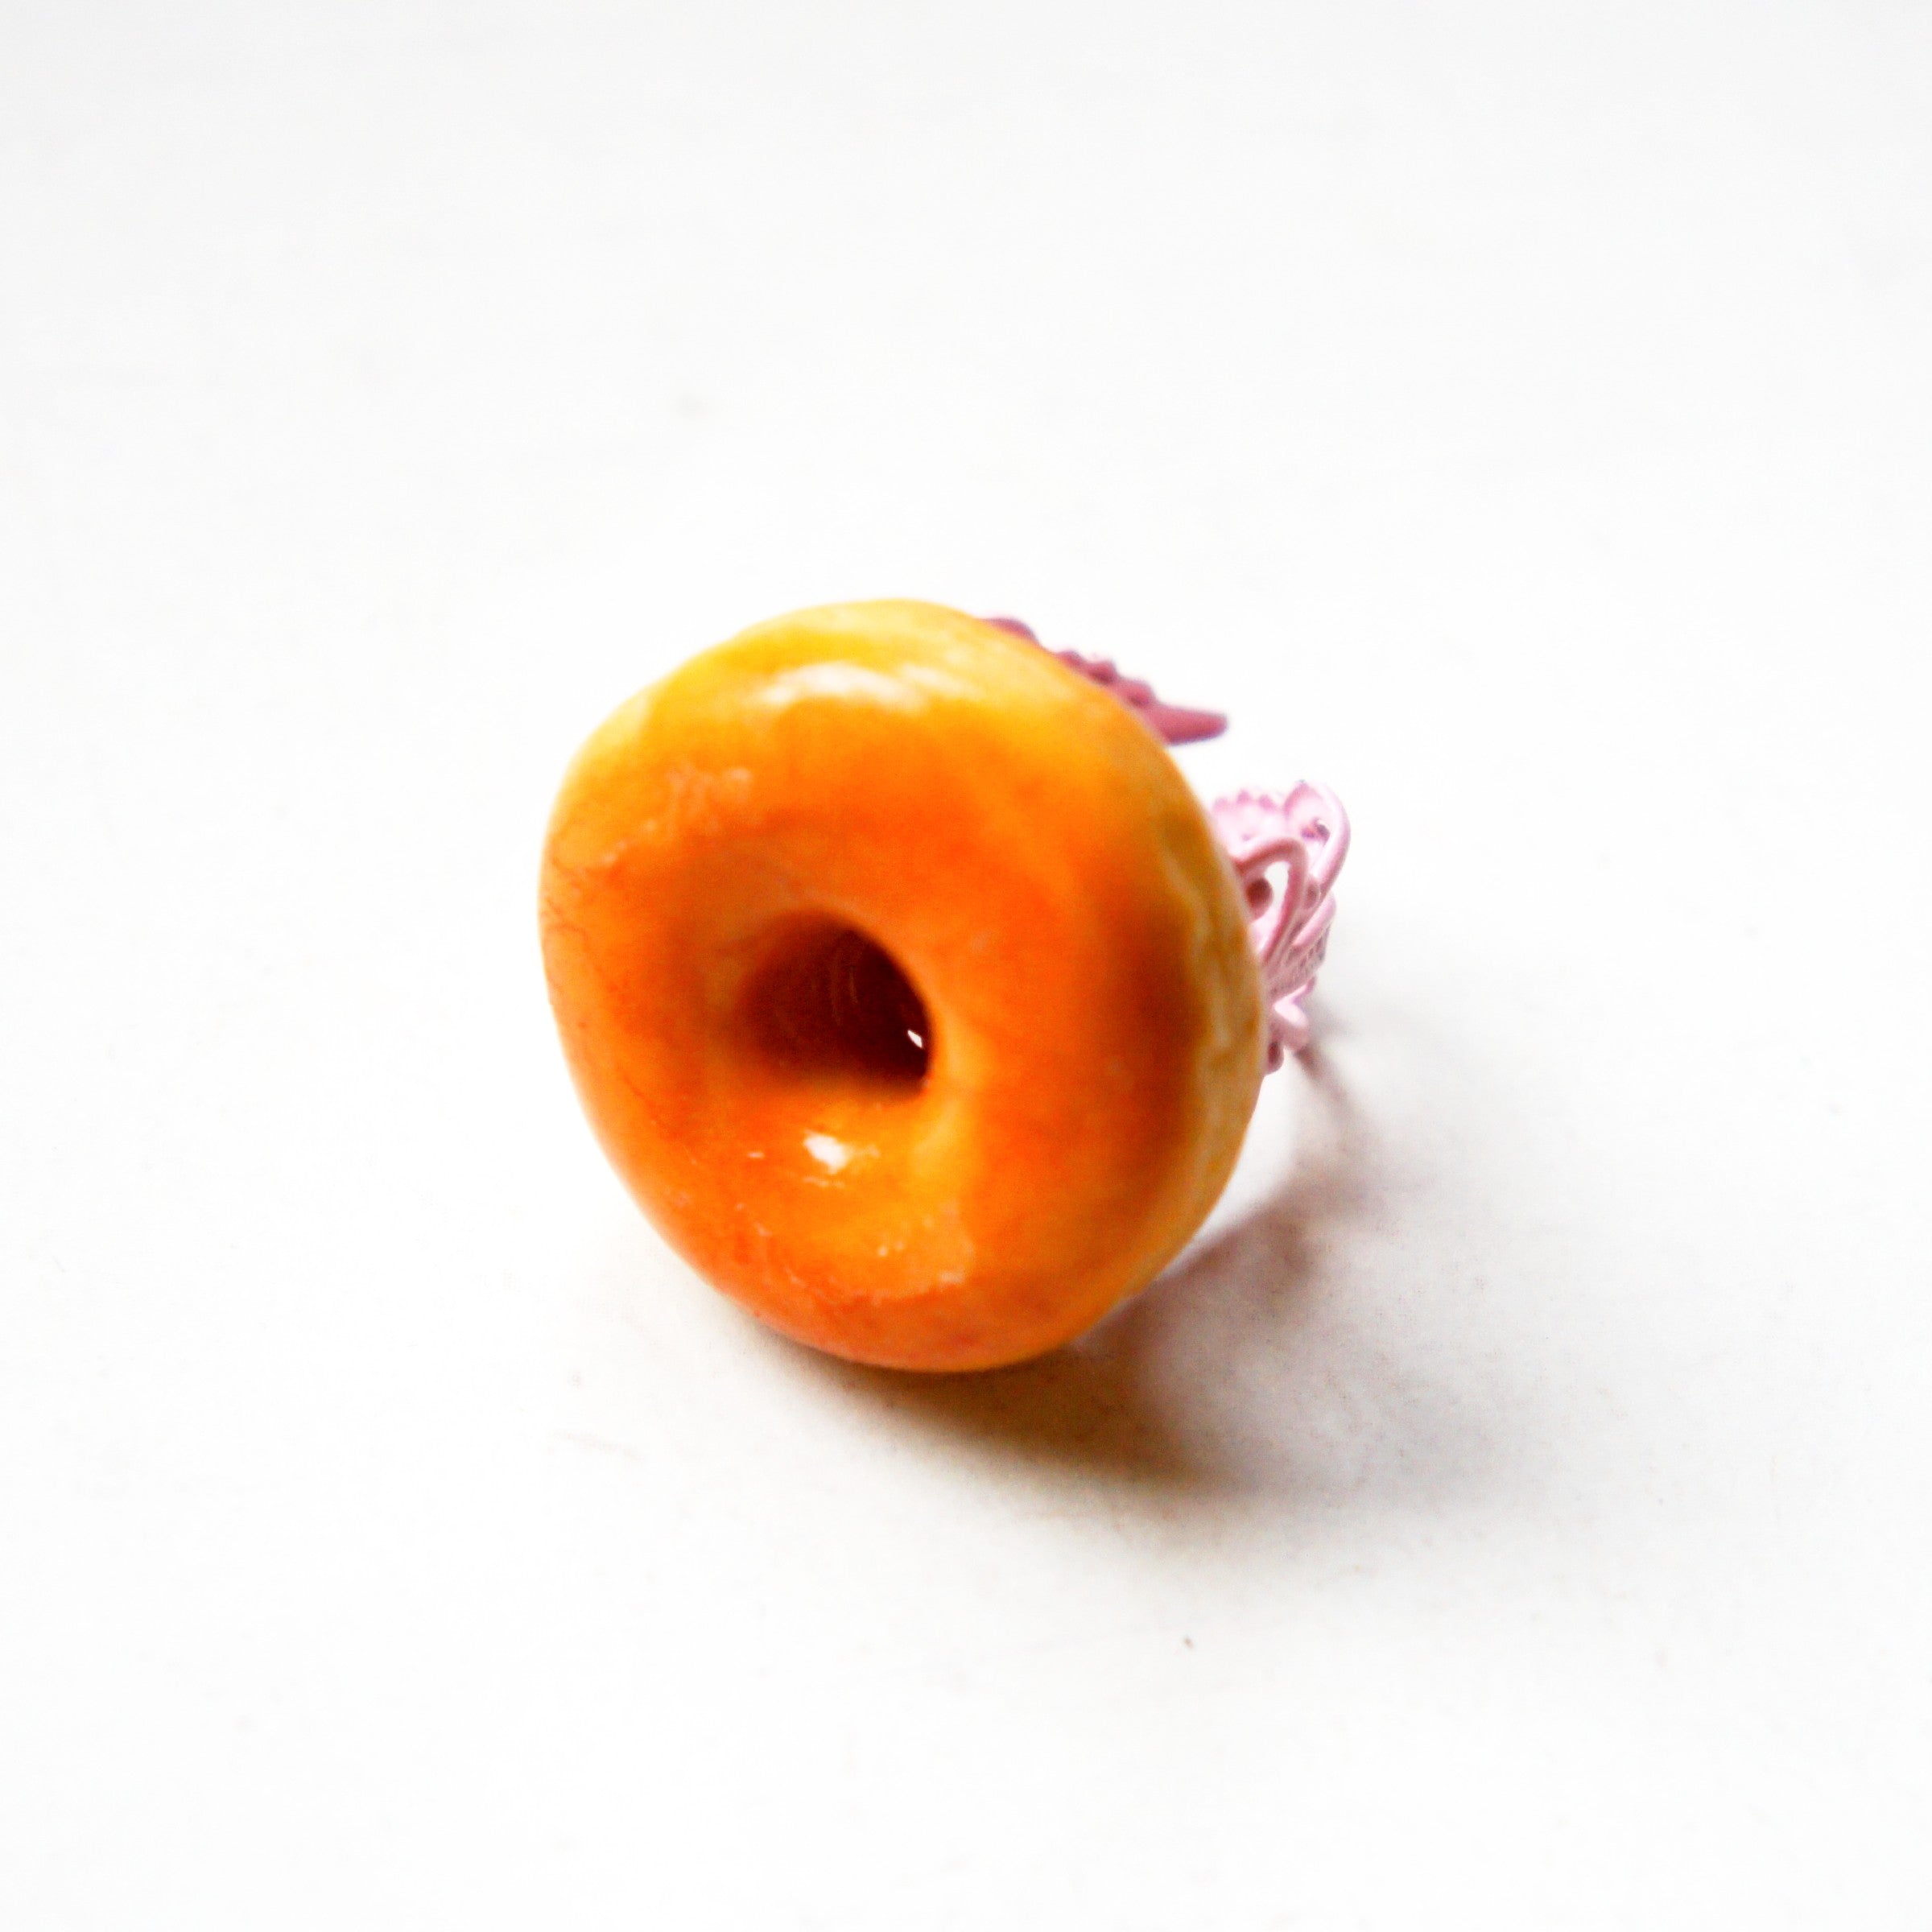 Glazed Donut Ring - Jillicious charms and accessories